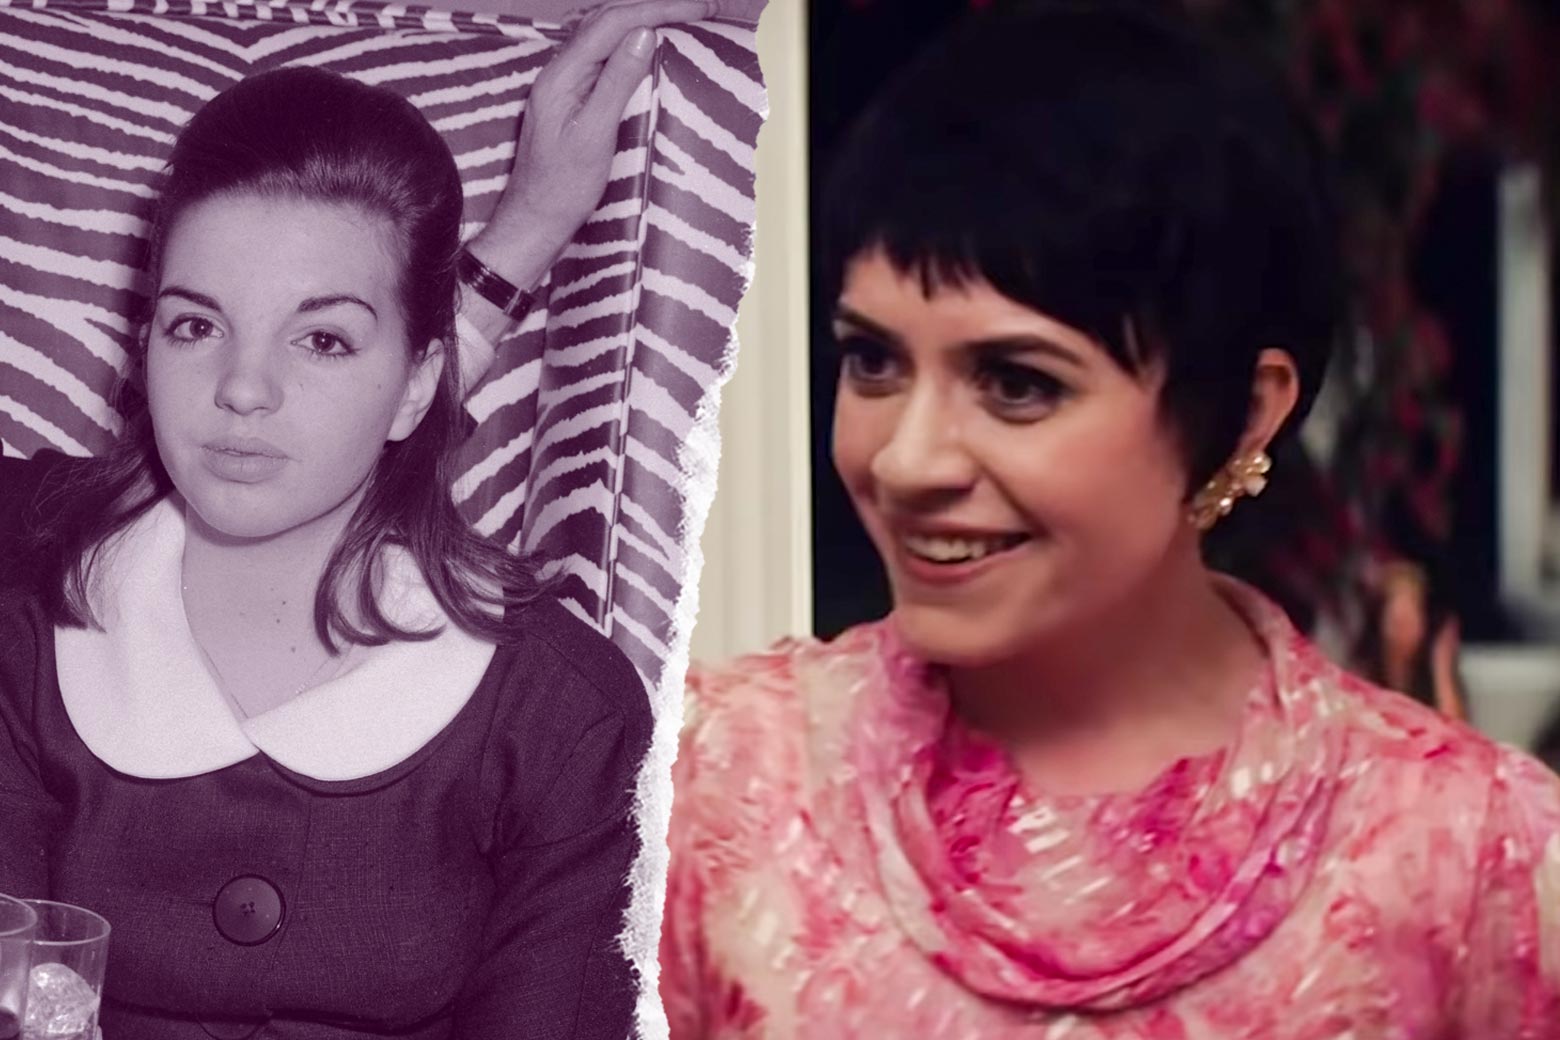 Side-by-side of Liza Minnelli, and Gemma-Leah Devereux as Liza Minnelli in the movie Judy.